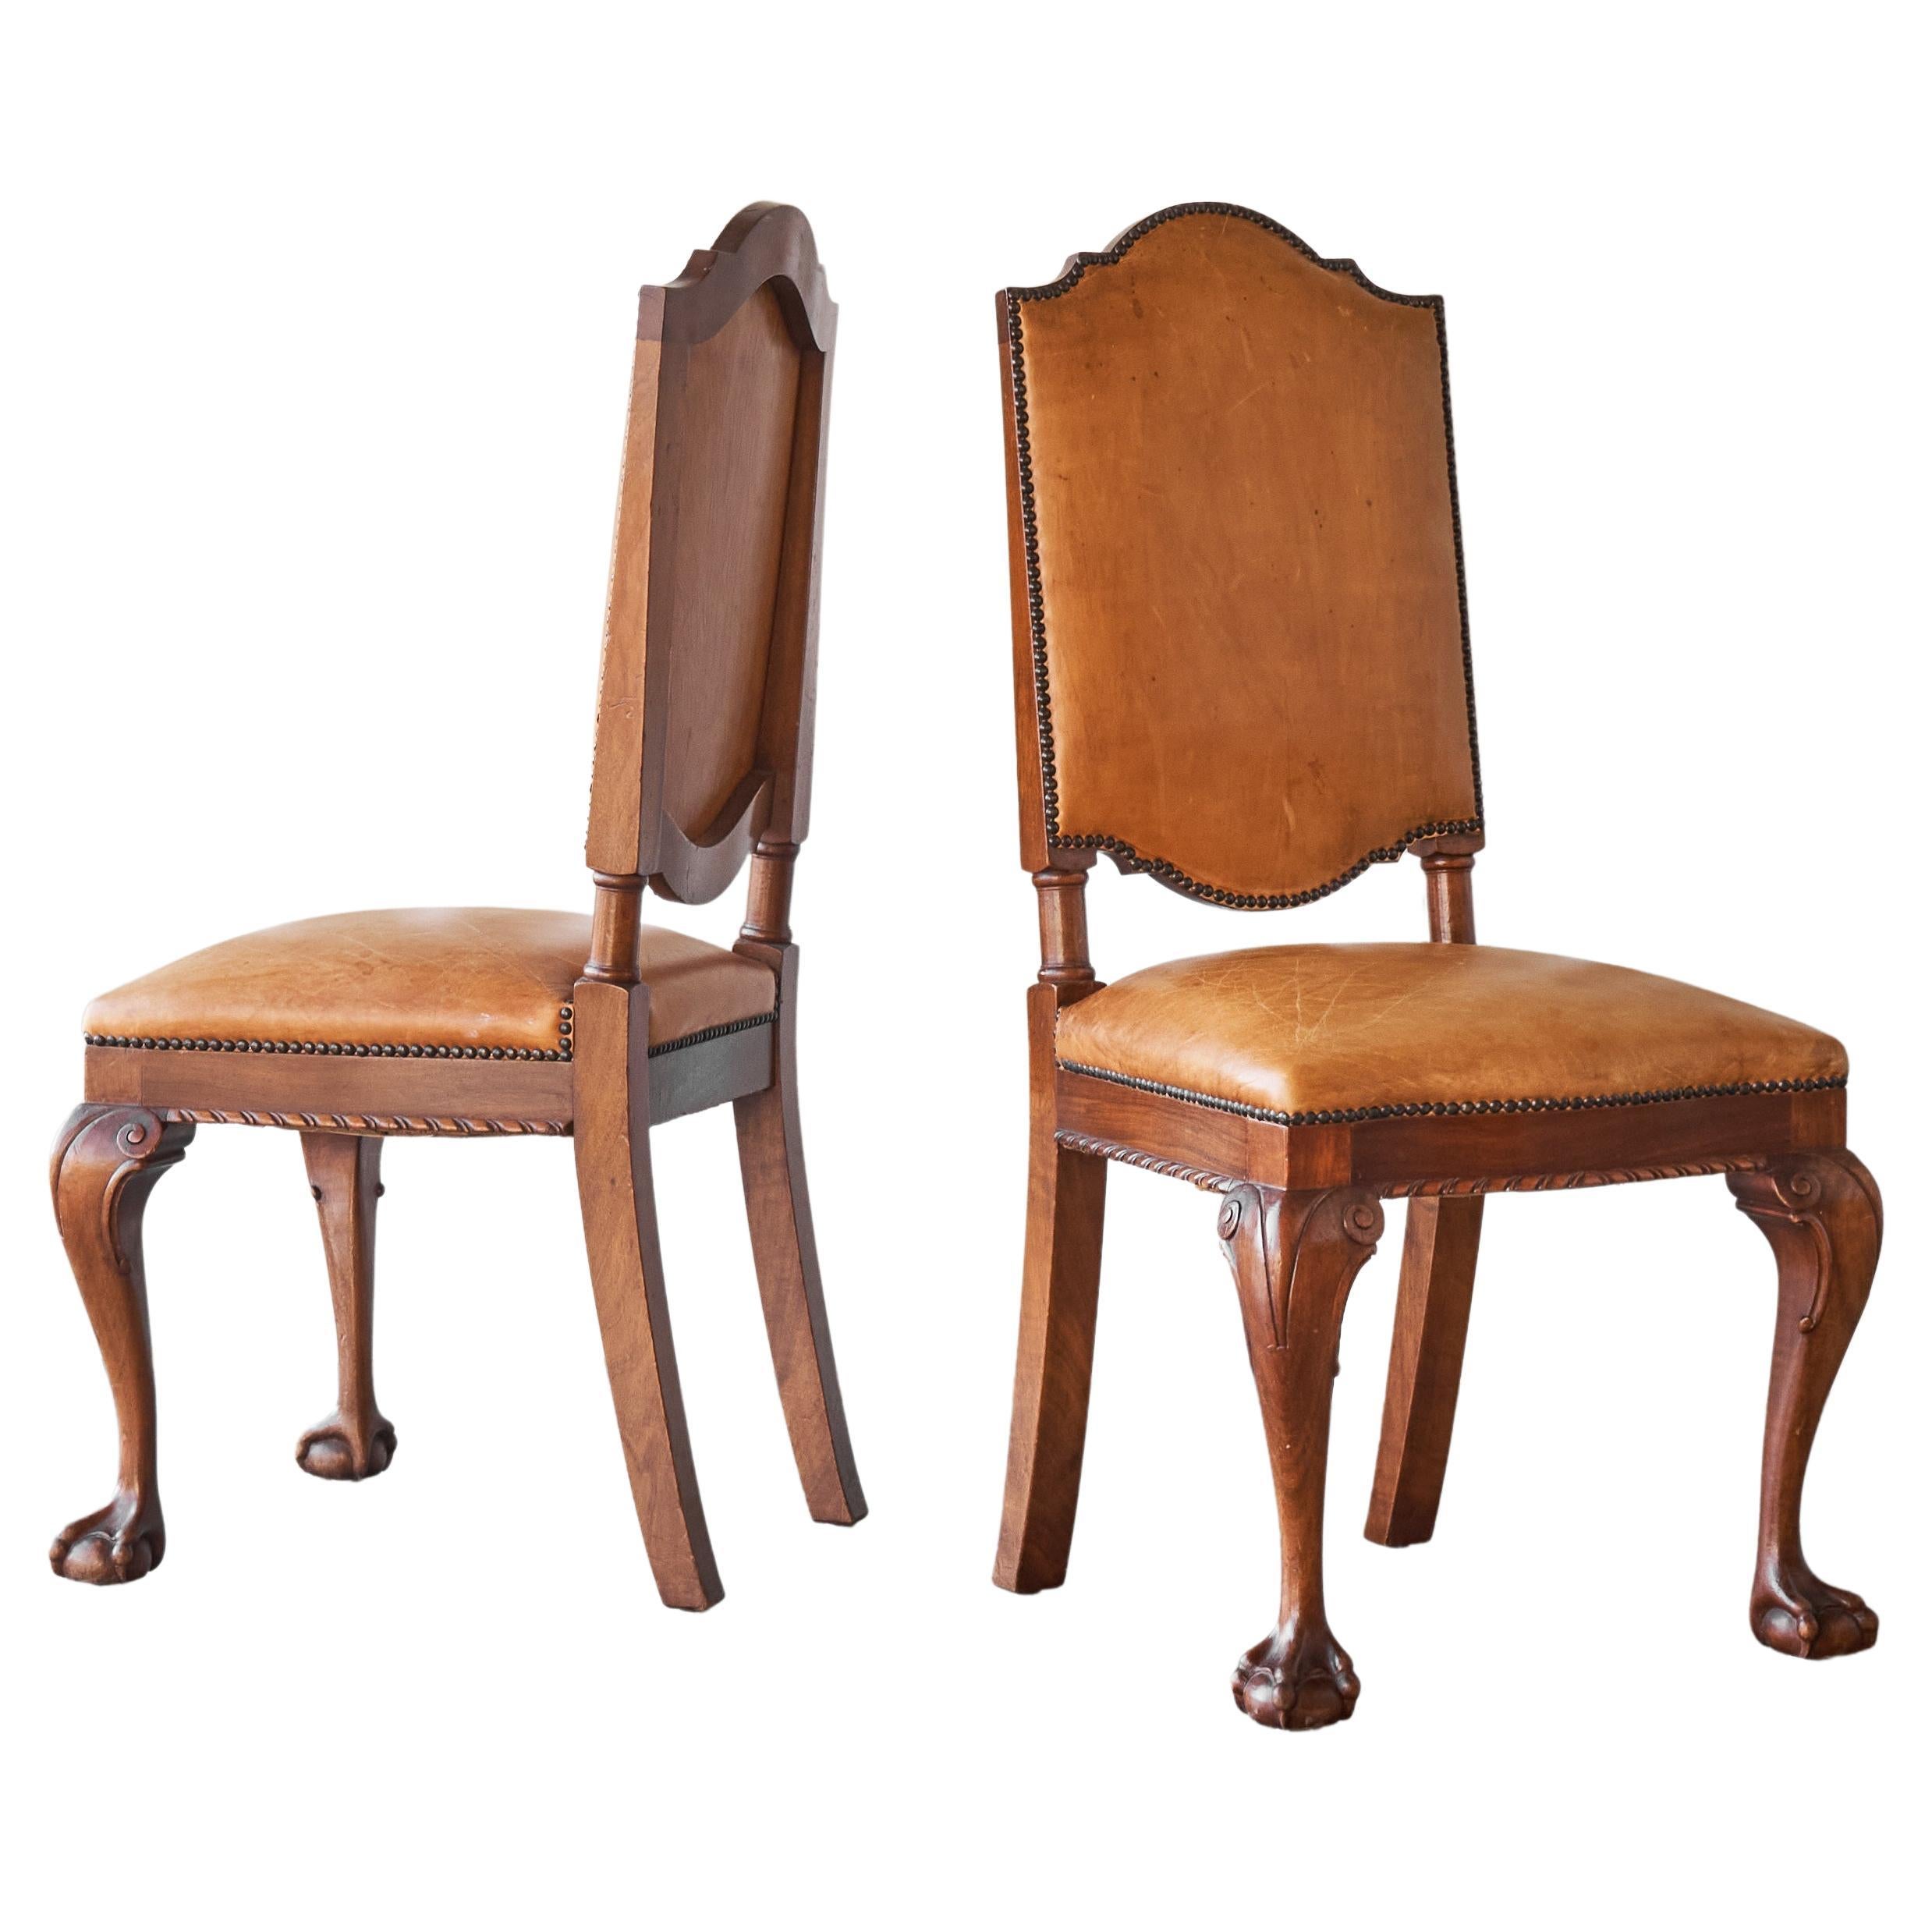 't Woonhuys Amsterdam Rare Pair of Side Chairs in Patinated Cognac Leather 1920s For Sale